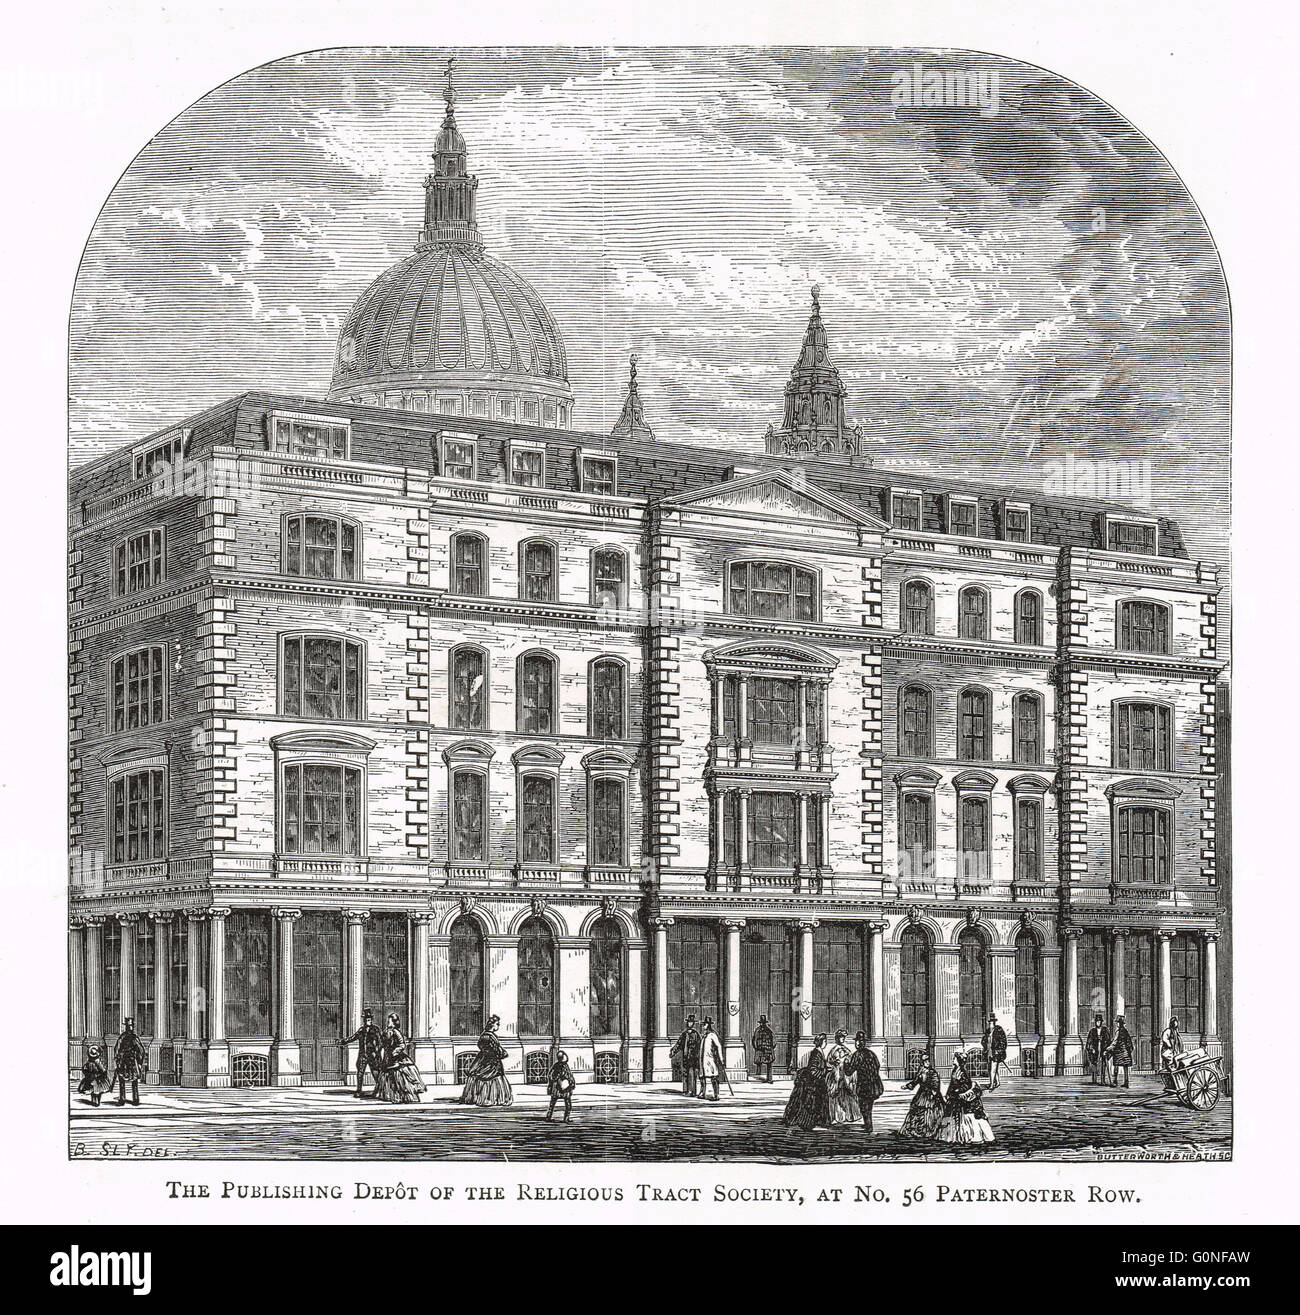 The publishing depot of The Religious Tract Society, 56 Paternoster Row, London, England in the 19th Century Stock Photo